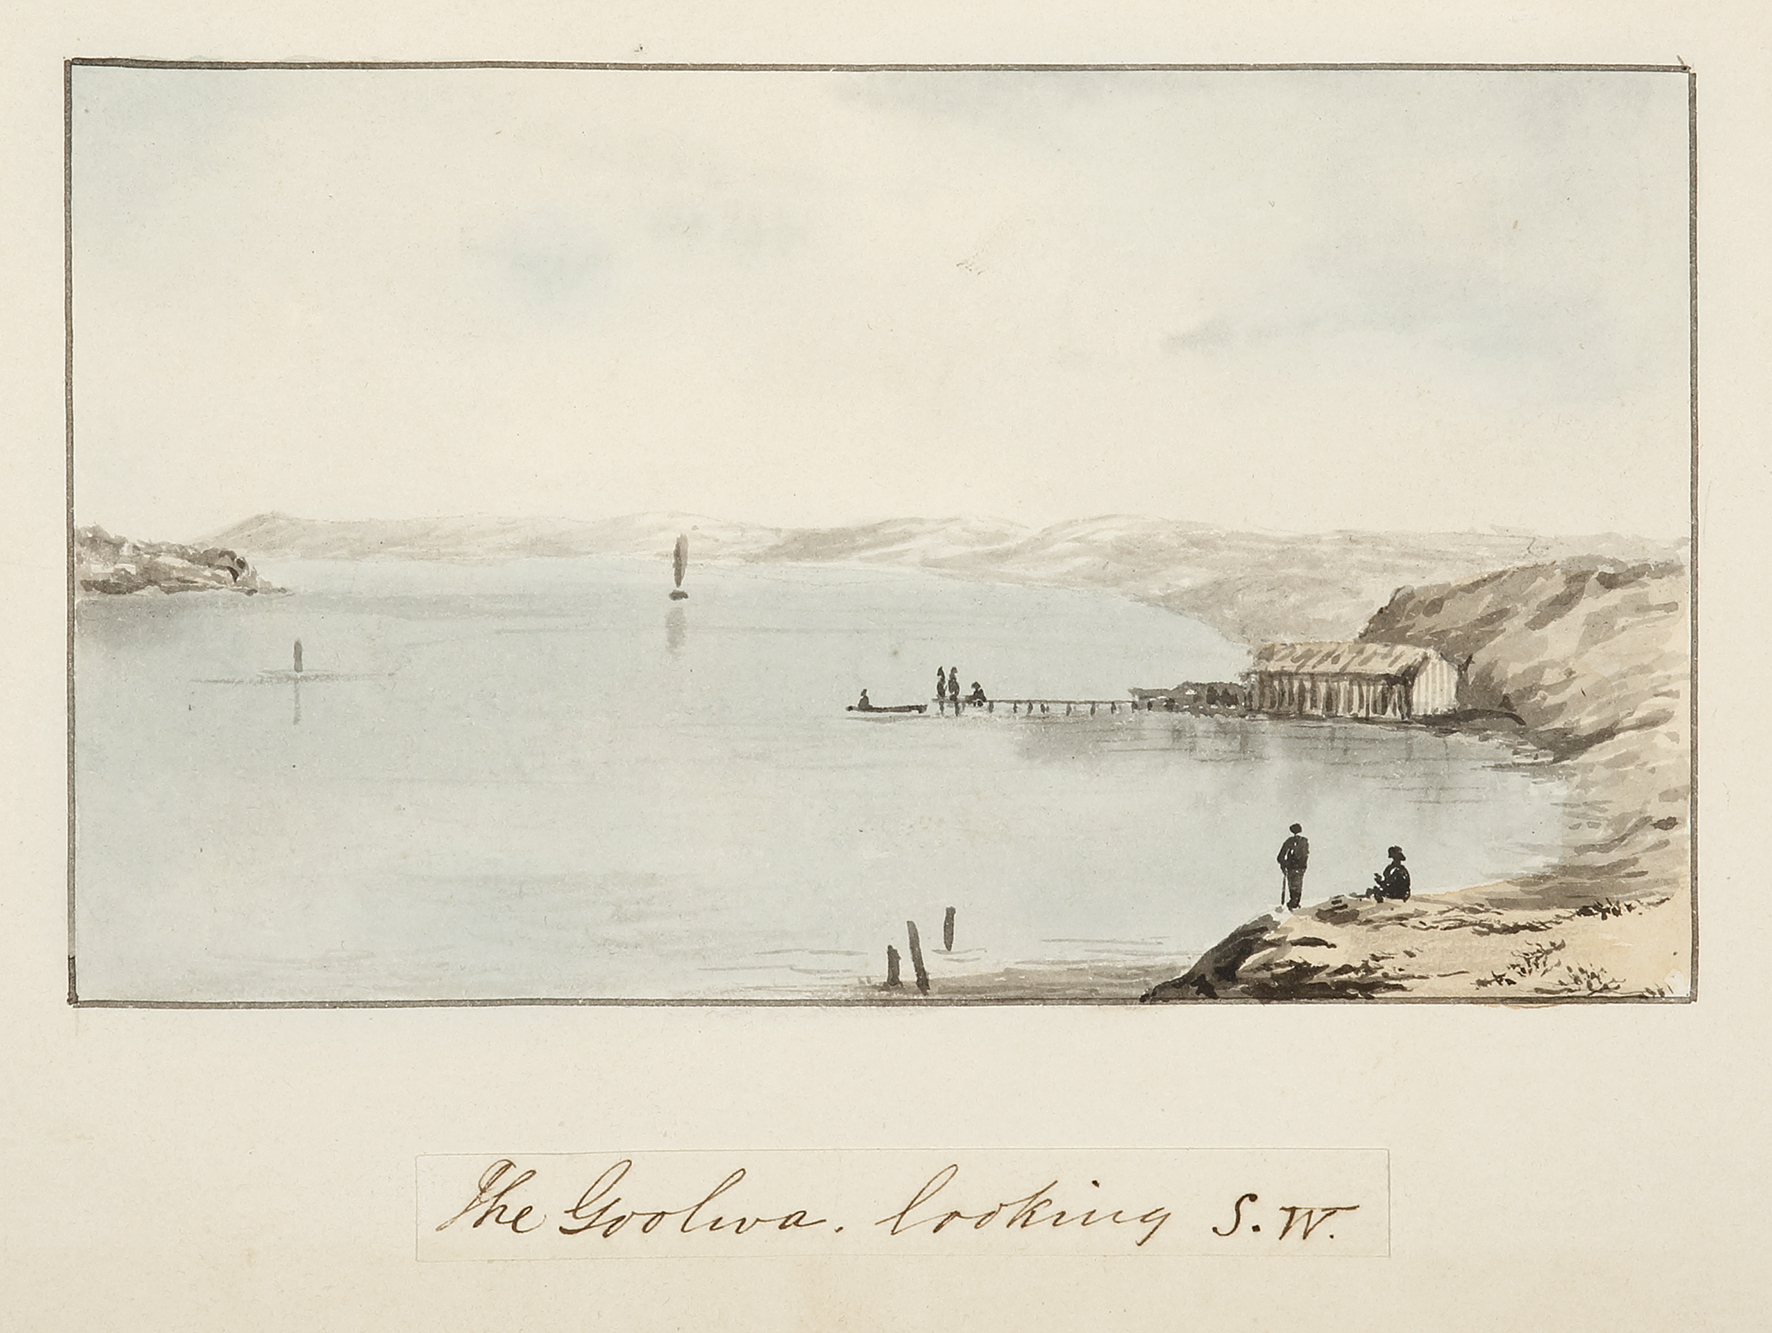 The Goolwa, Looking S.W. - Antique Painting from 1854